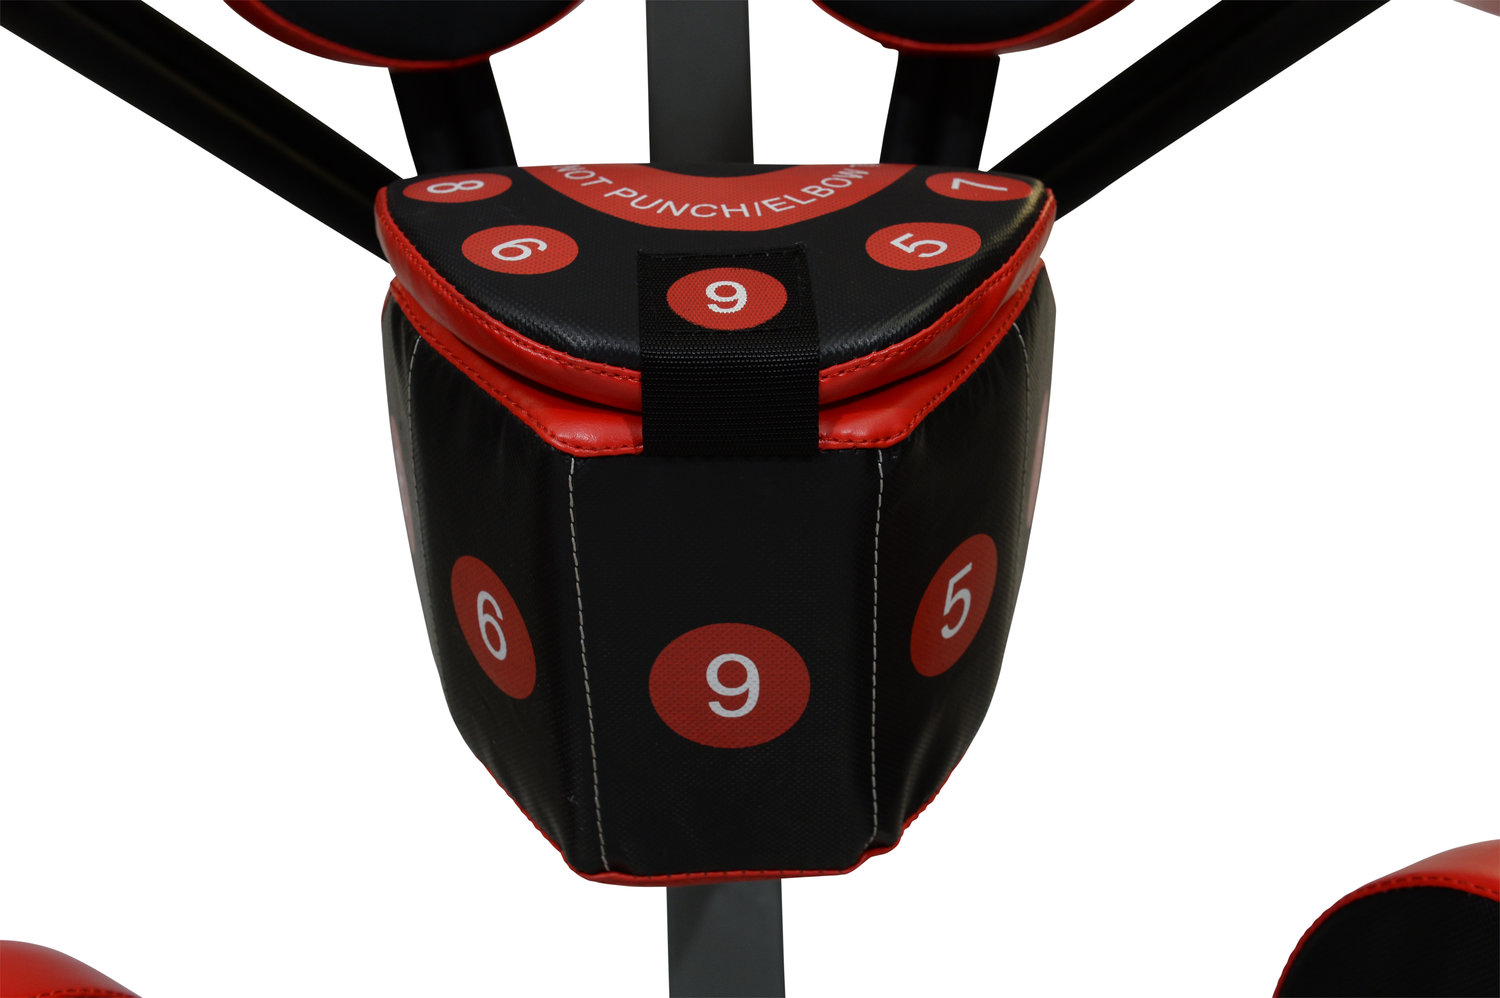 FightMaster Boxing Machine - Free-Standing Punching Bag System